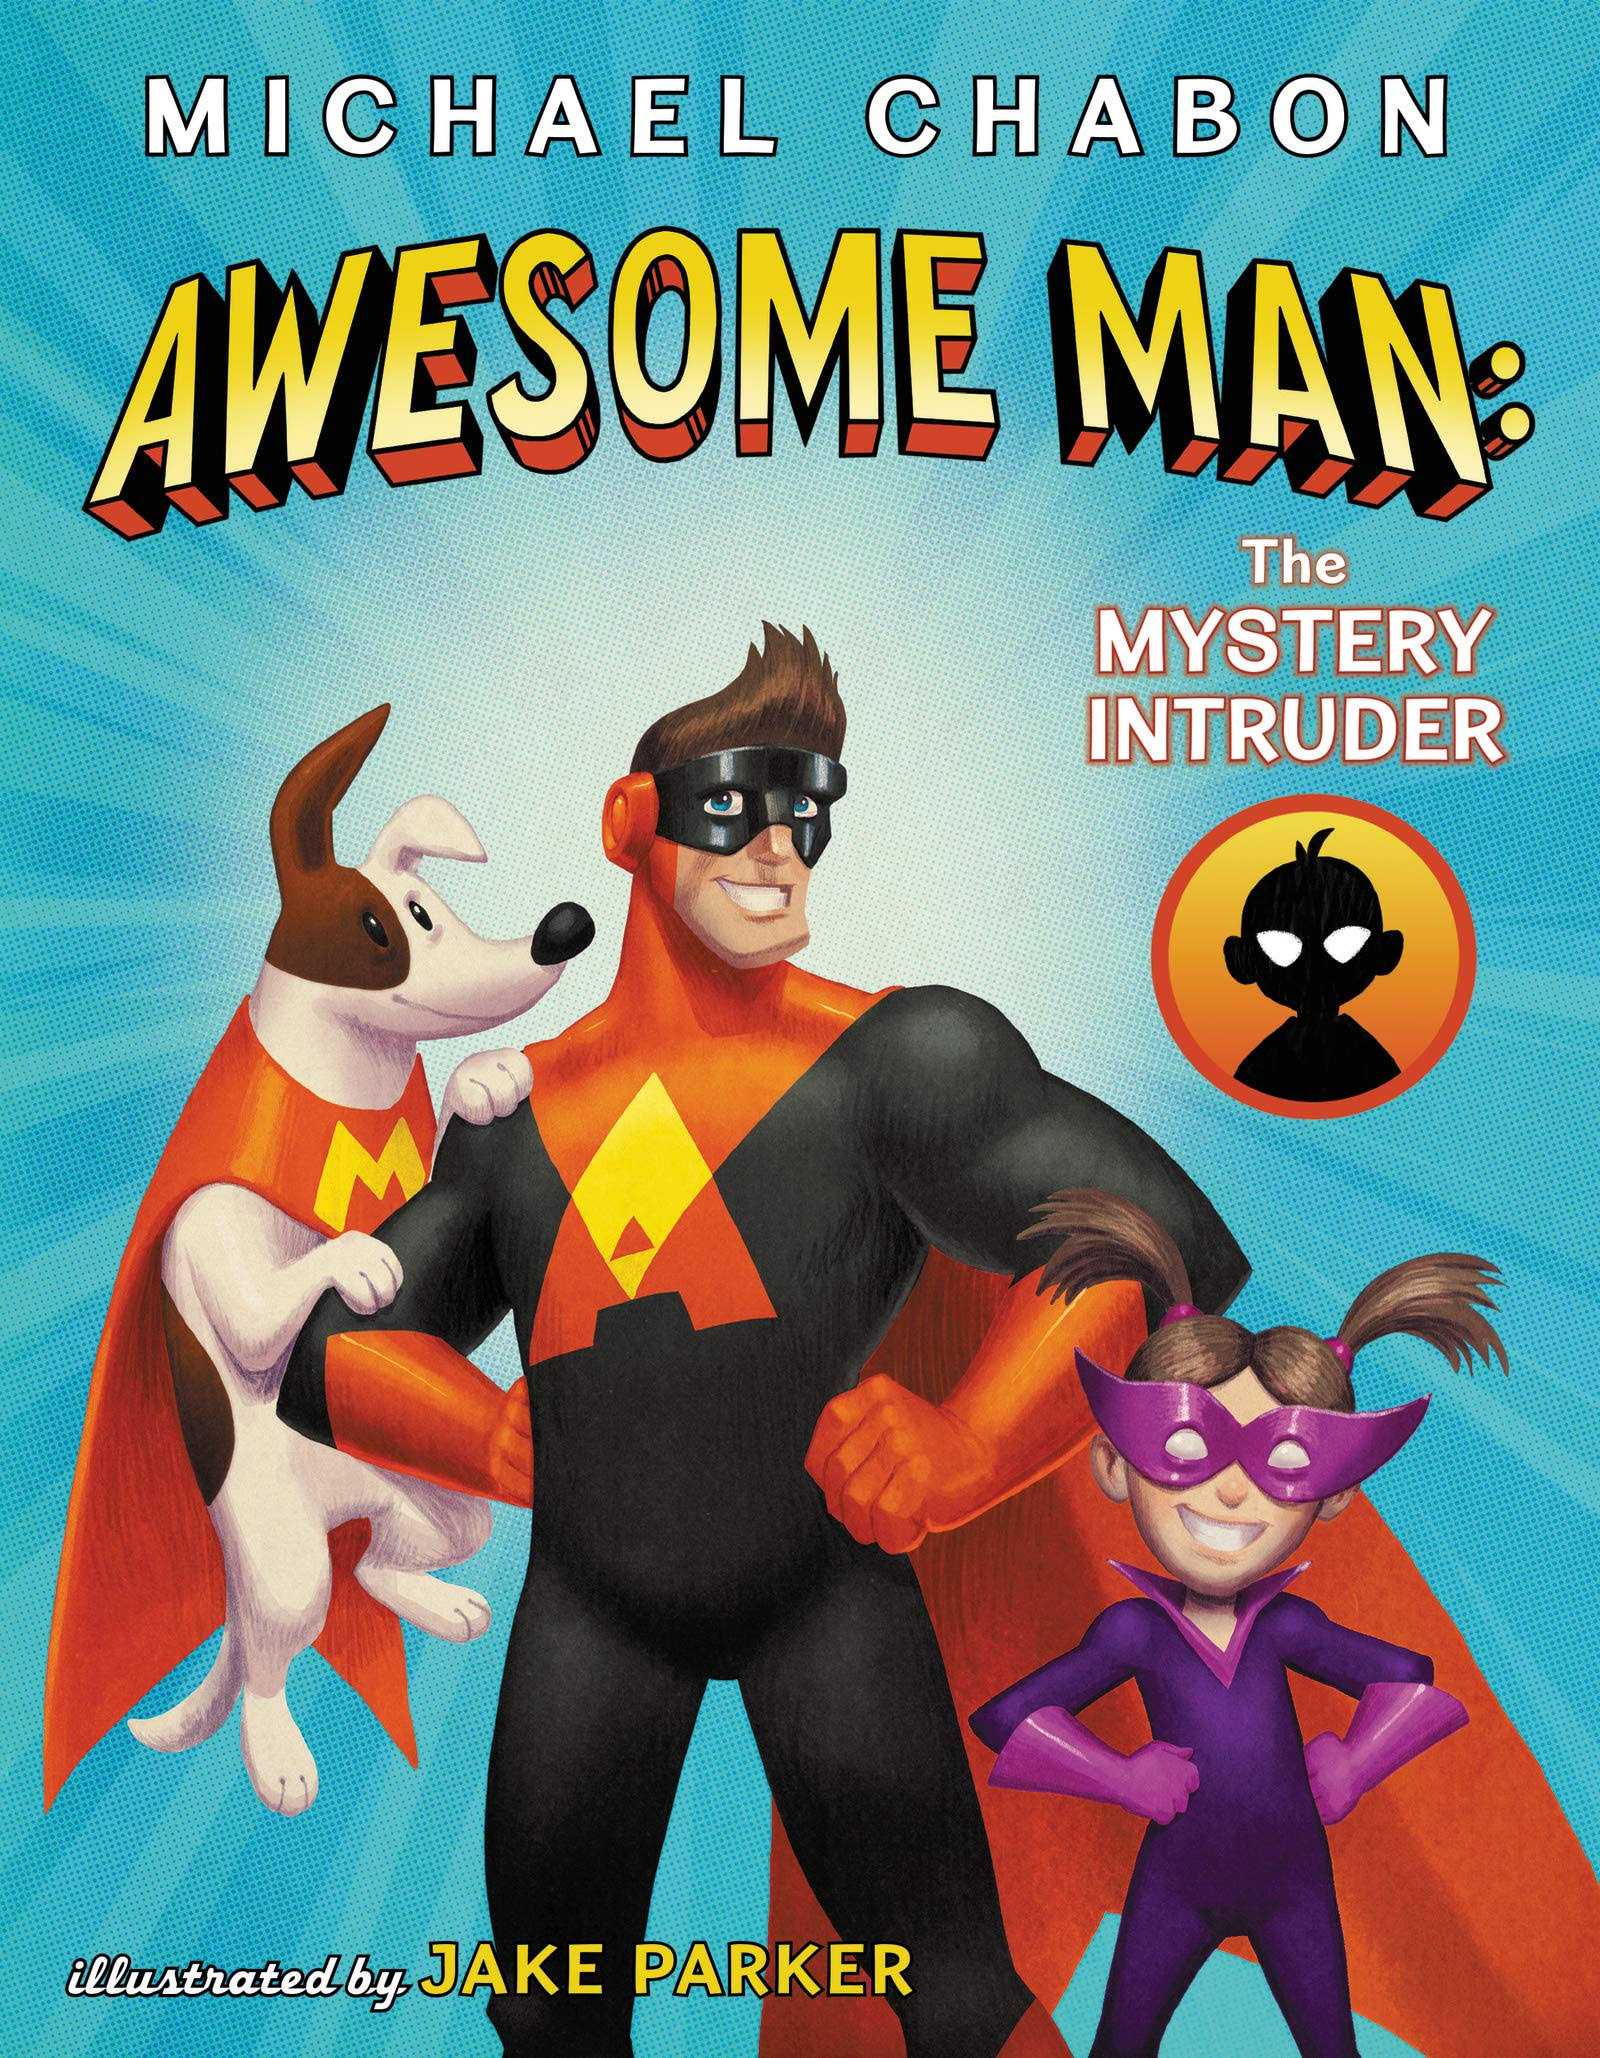 Awesome Man: The Mystery Intruder [Book]